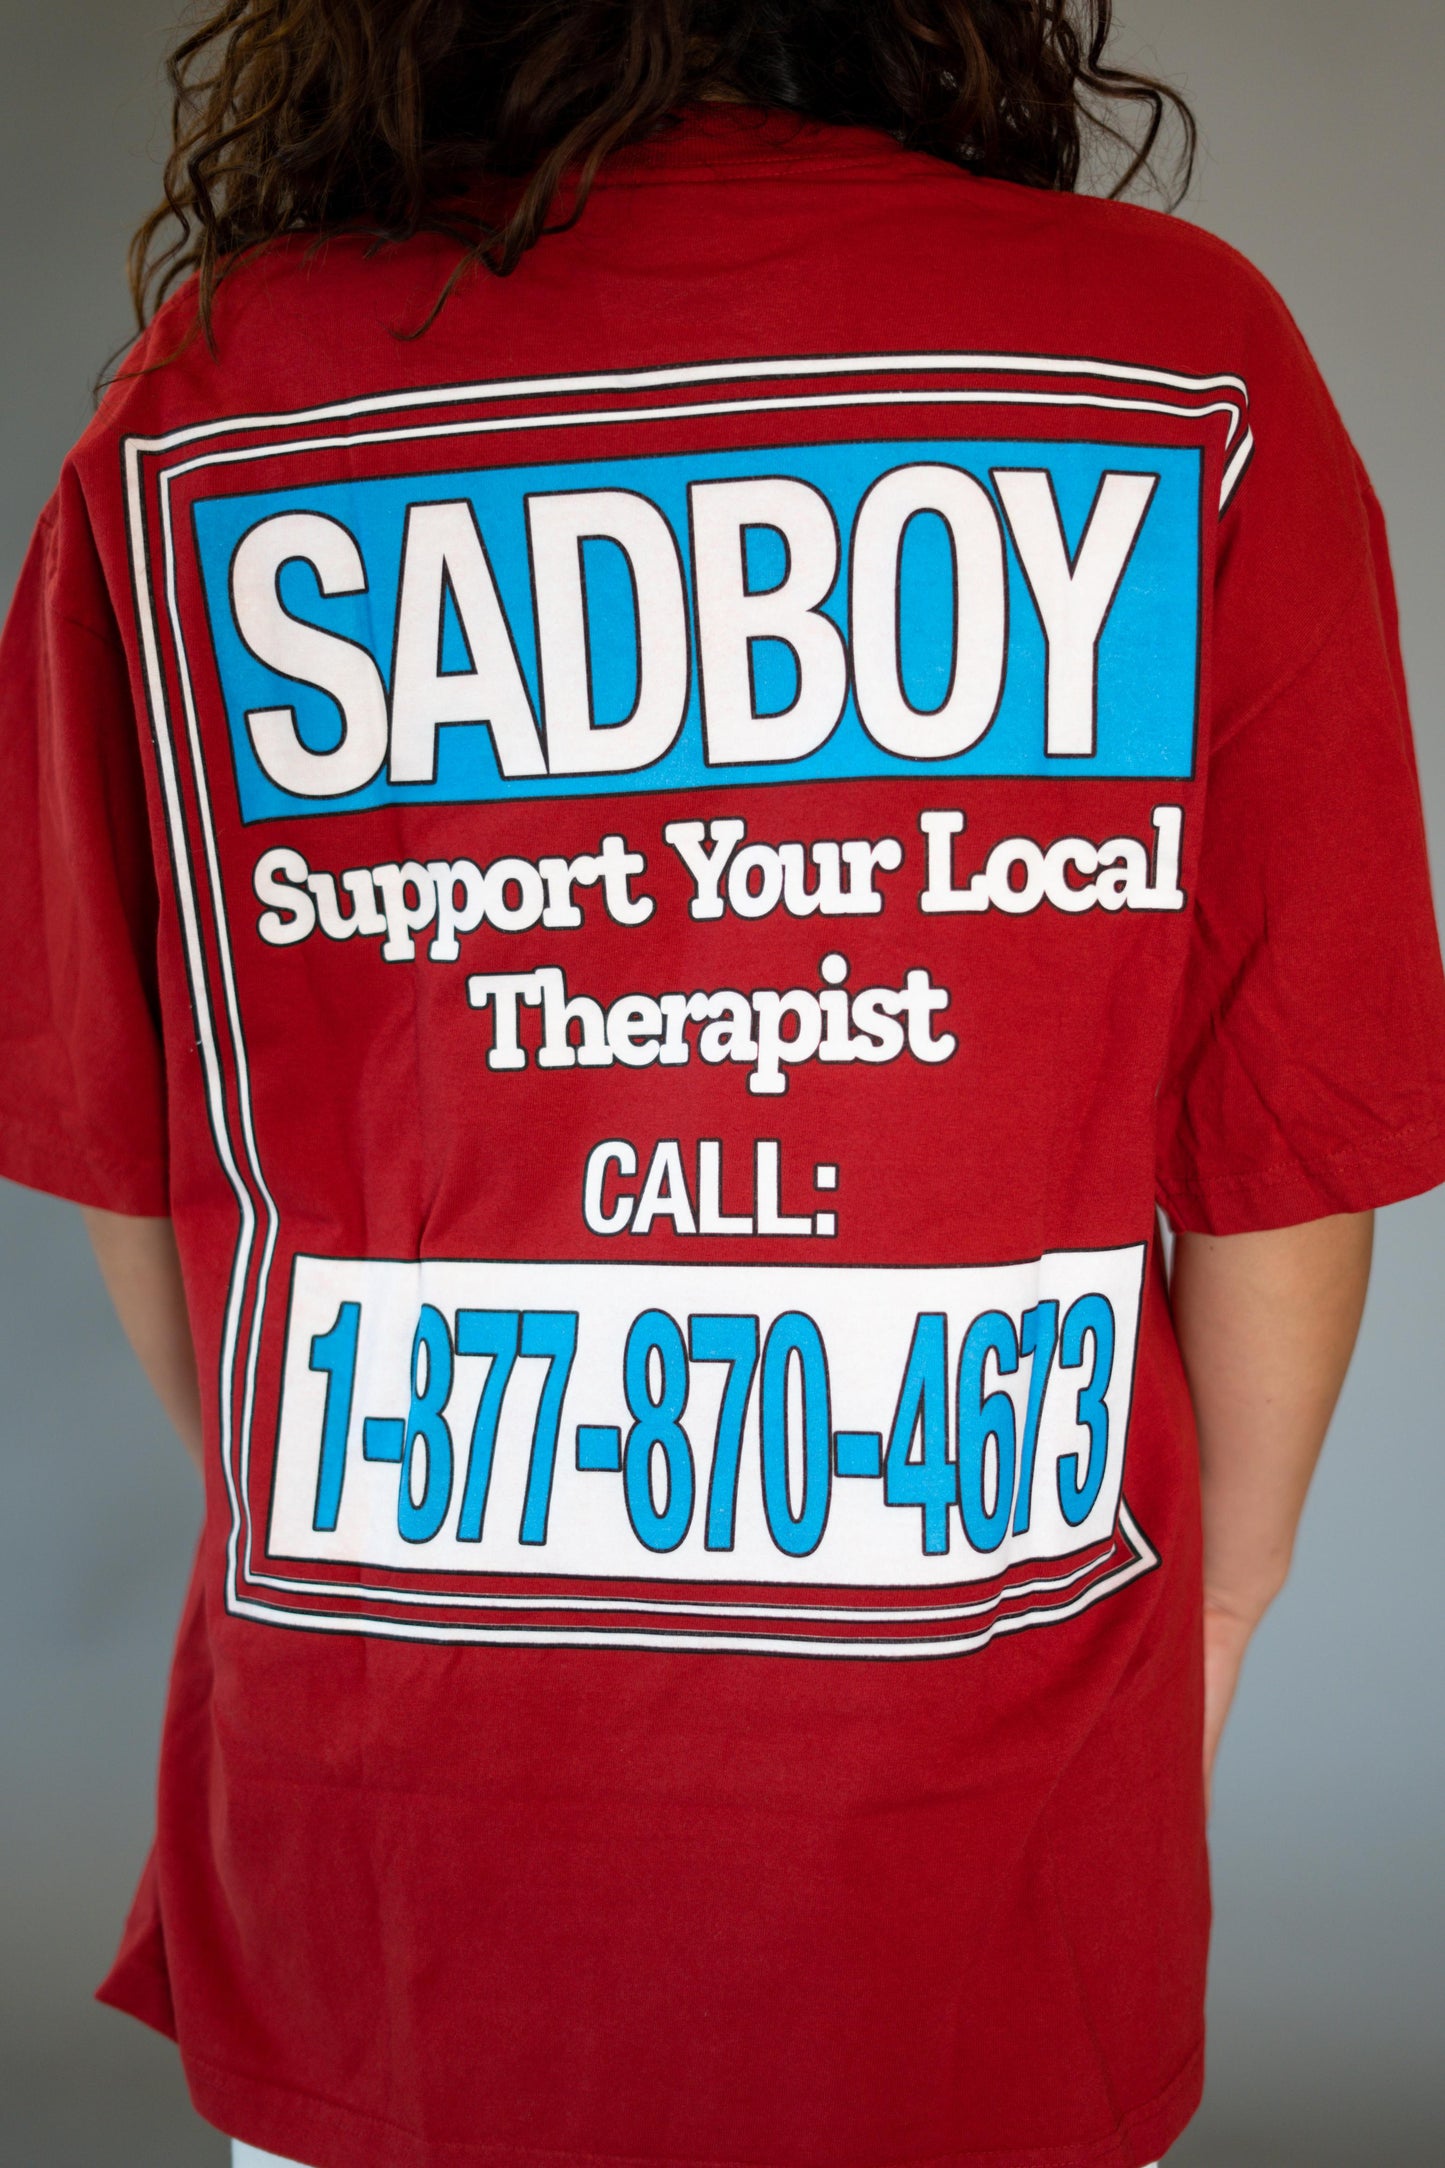 Support Your Local Therapist - Red